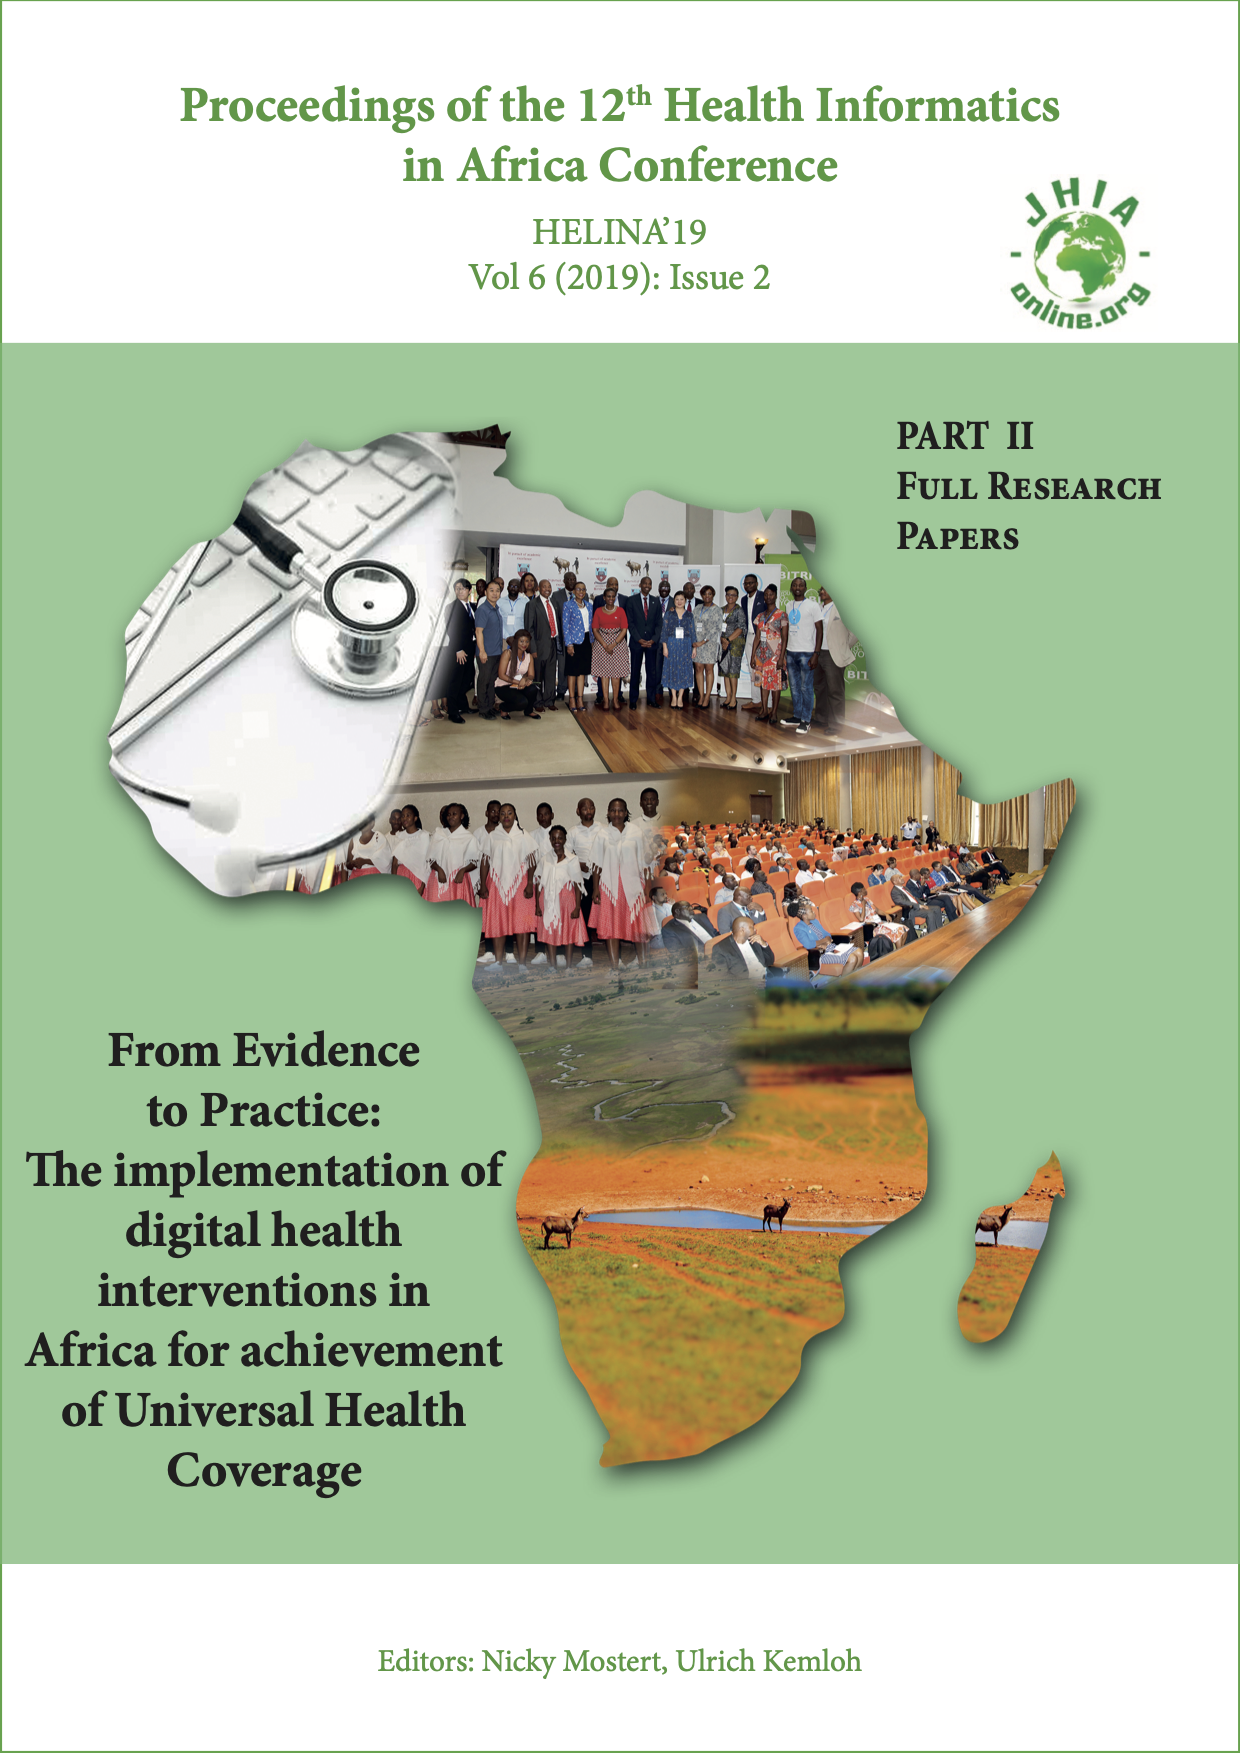 					View Vol. 6 No. 2 (2019): Special Issue "From Evidence to Practice: The implementation of digital health interventions in Africa for achievement of Universal Health Coverage"
				